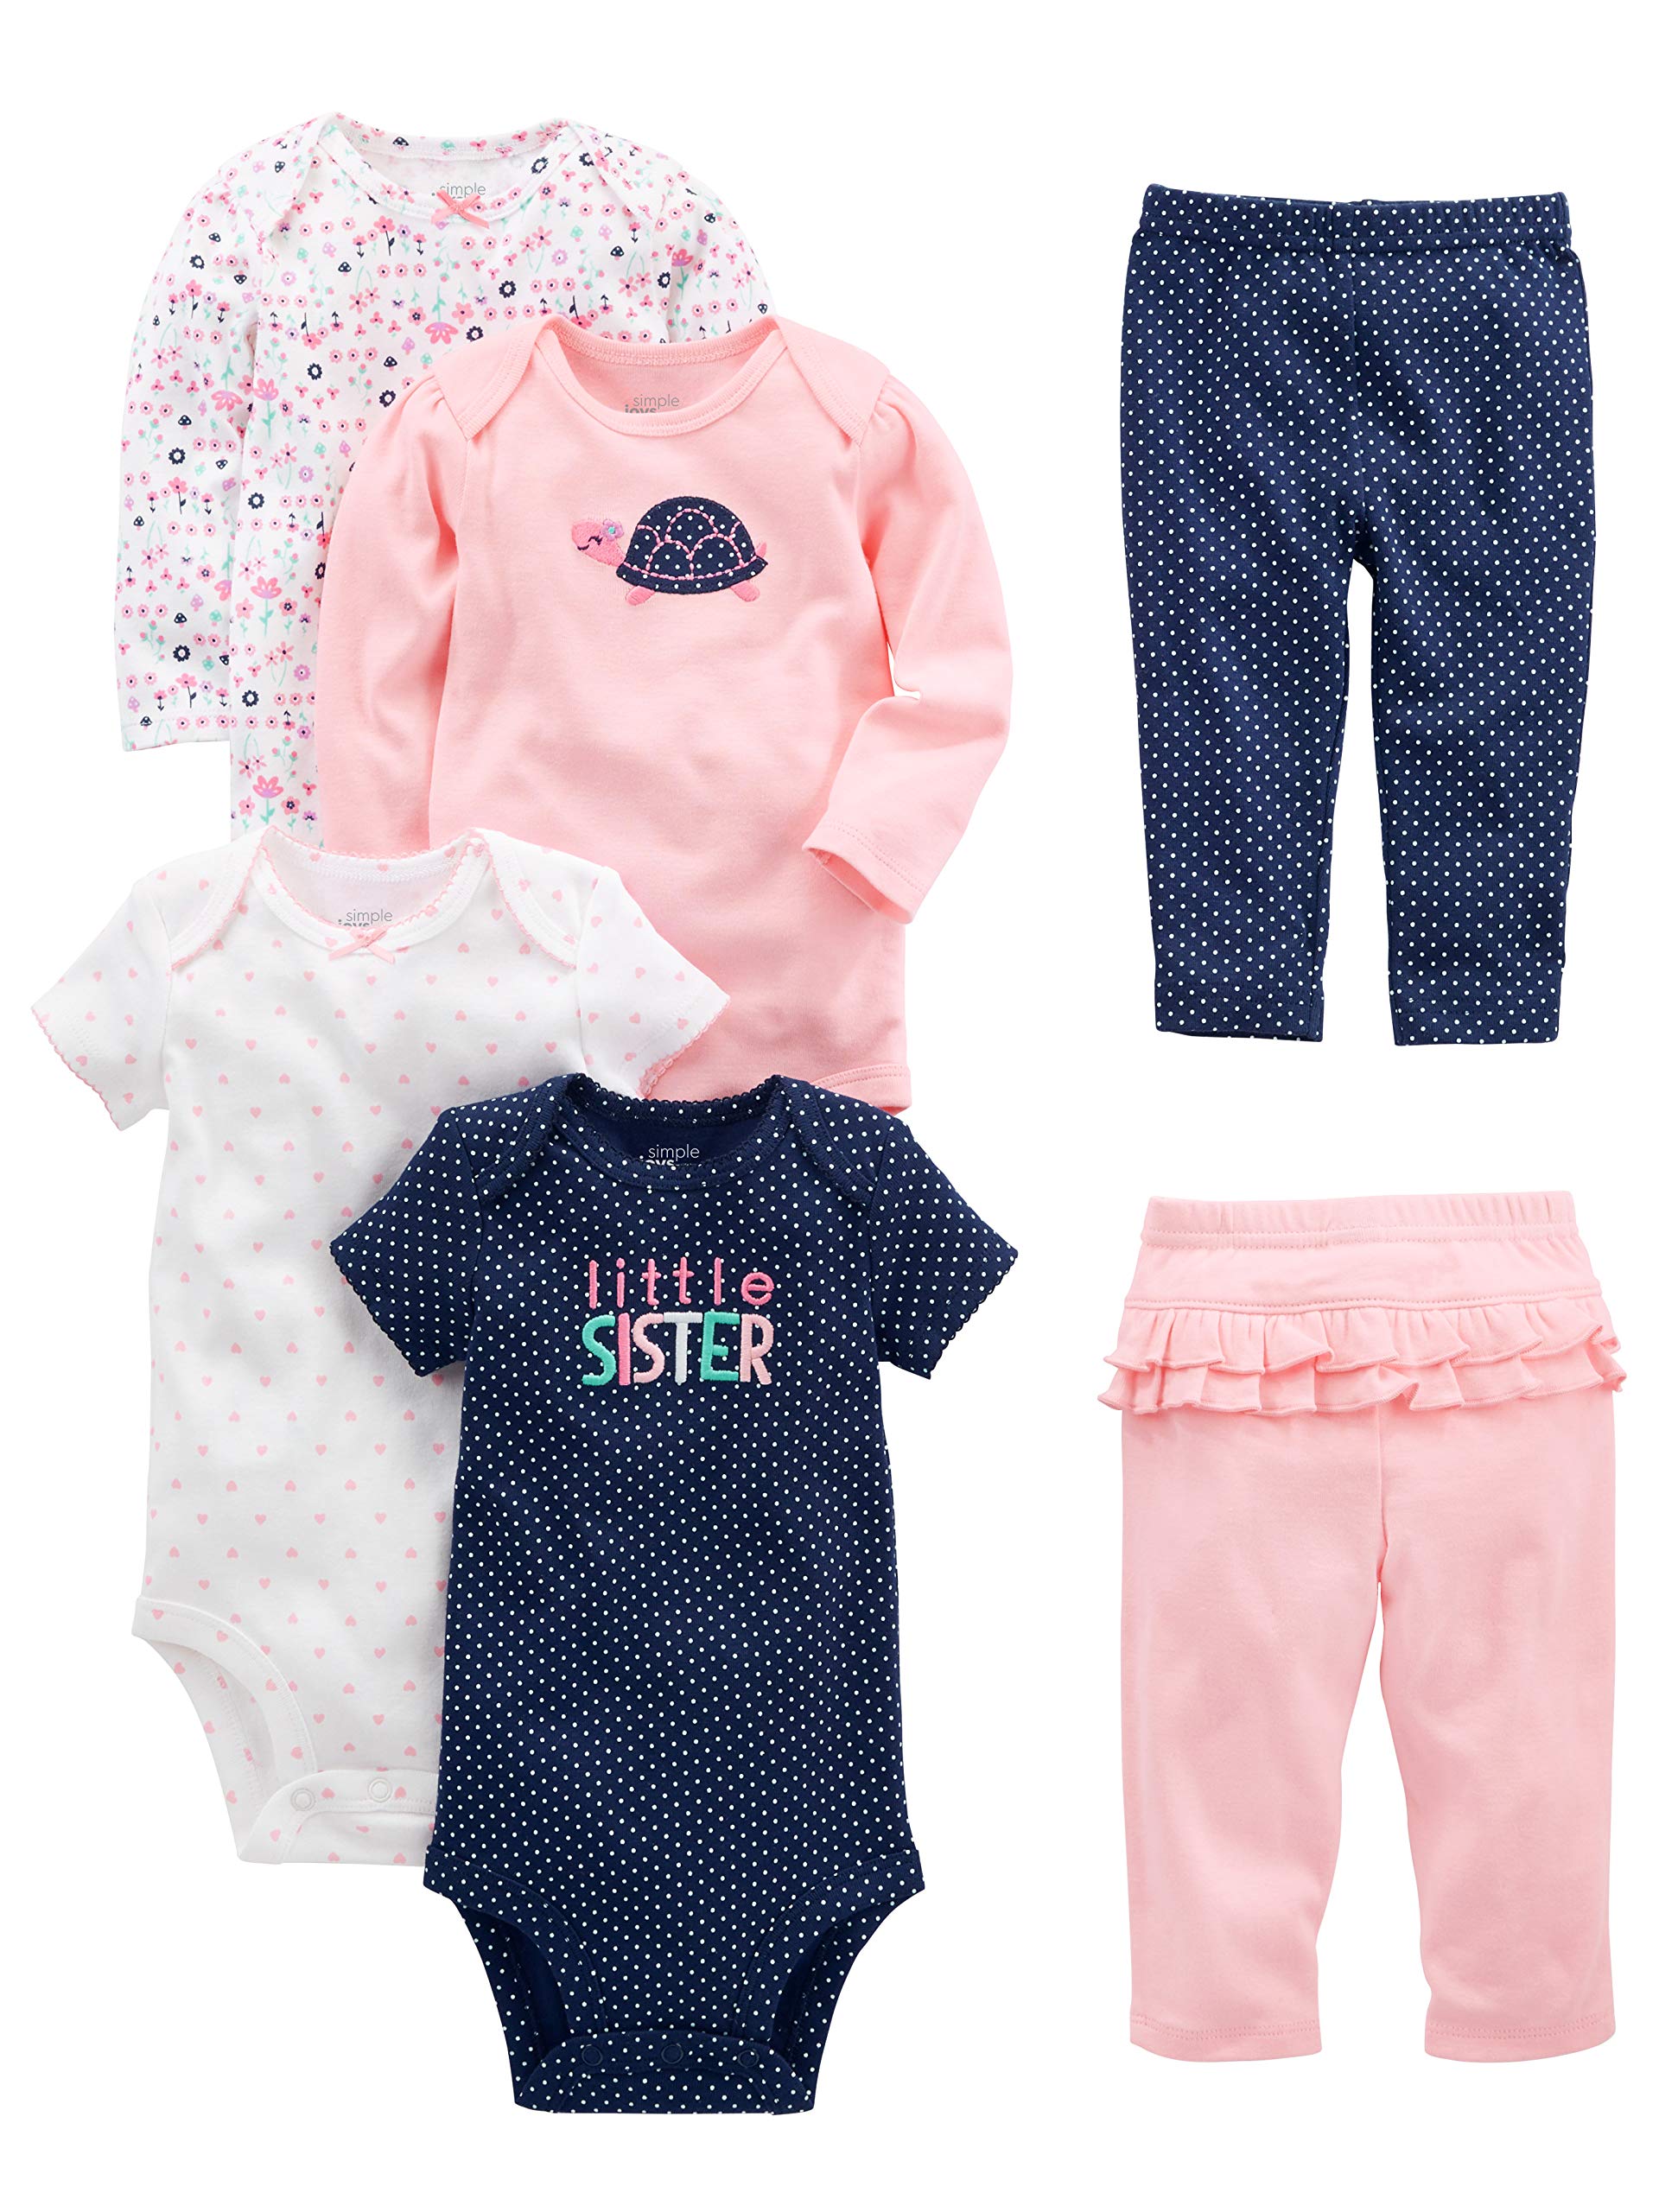 NEW Simple Joys Carters Baby Girls 4 Pack Pant 3 - 6 Month Stripe Polka Dot  Pink